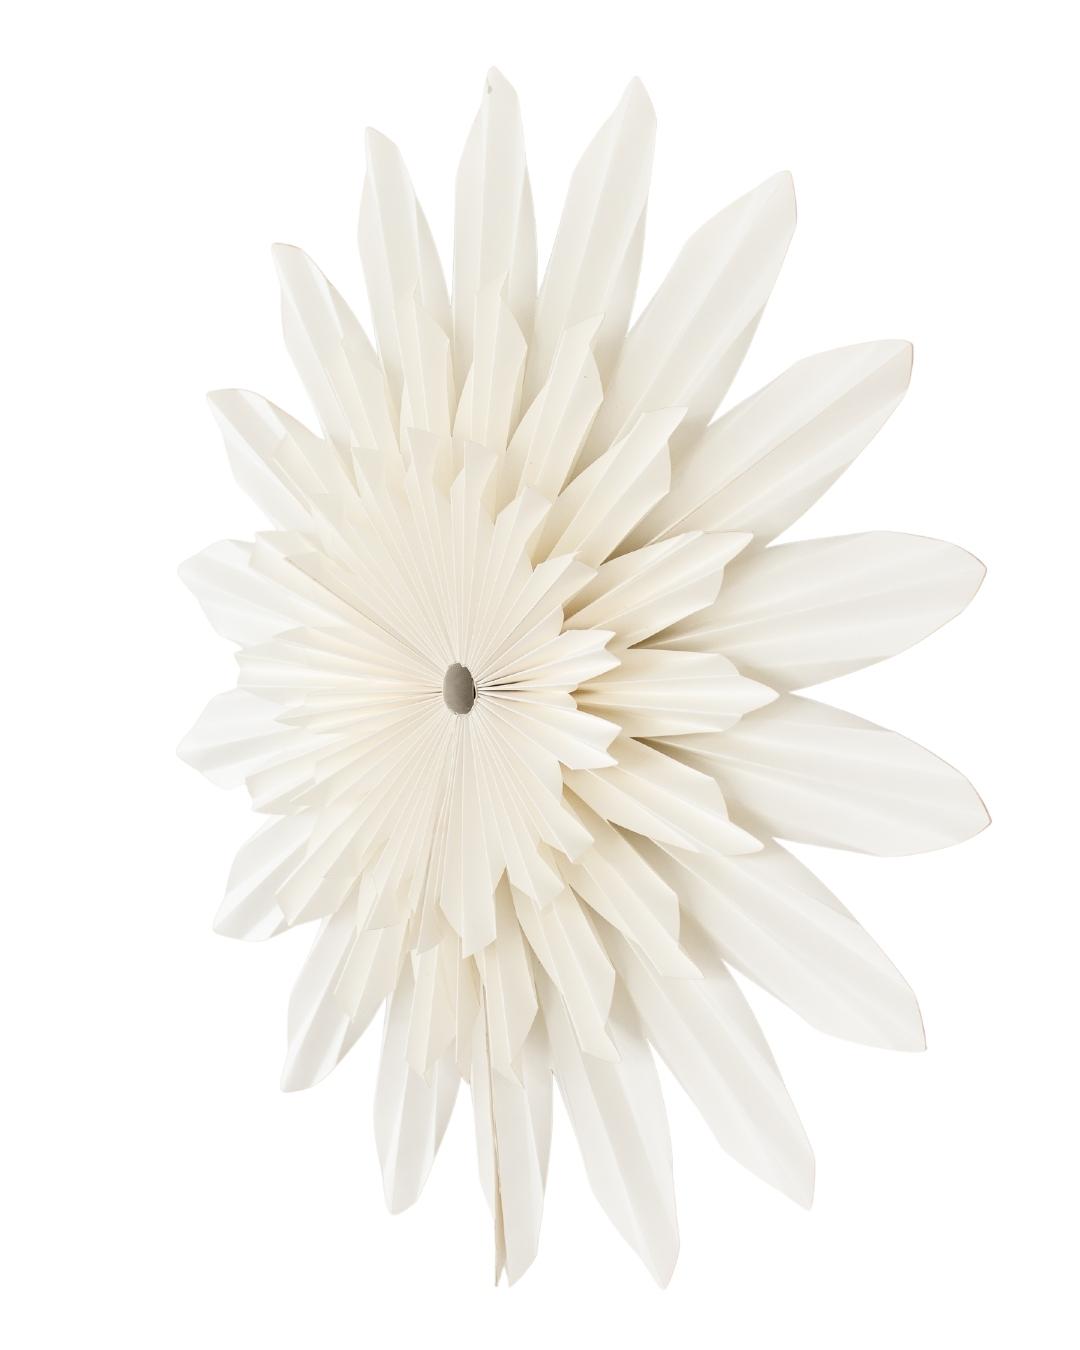 Off-white paper flower wall hanging against a white background viewed from an angle